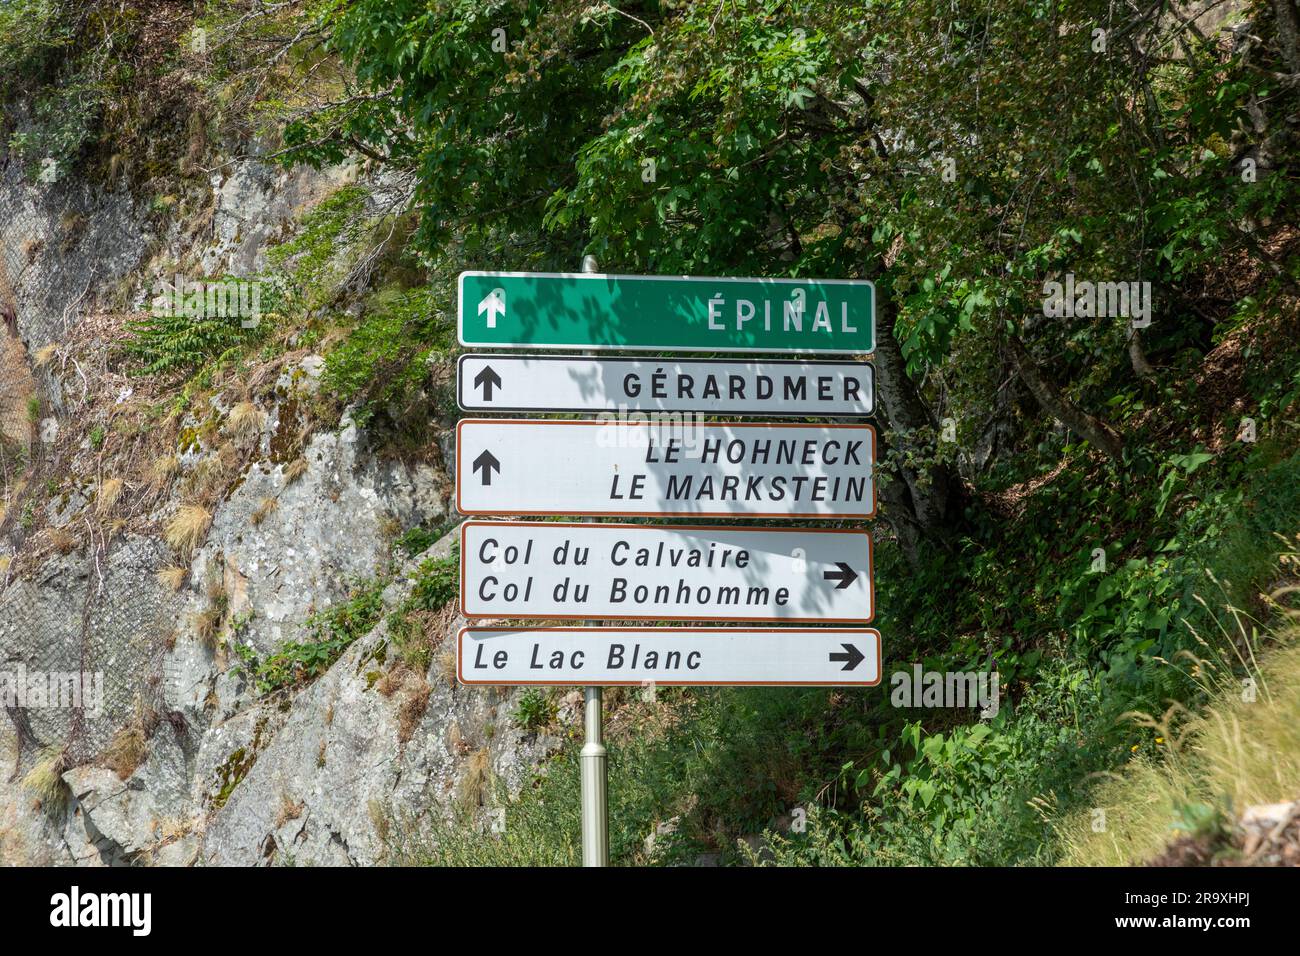 street sign with arrow in the Vosges to EPINAL, GERARDMER, LE HOHNECK, LE LAC BLANC AND COL DU Bonhomme in France Stock Photo